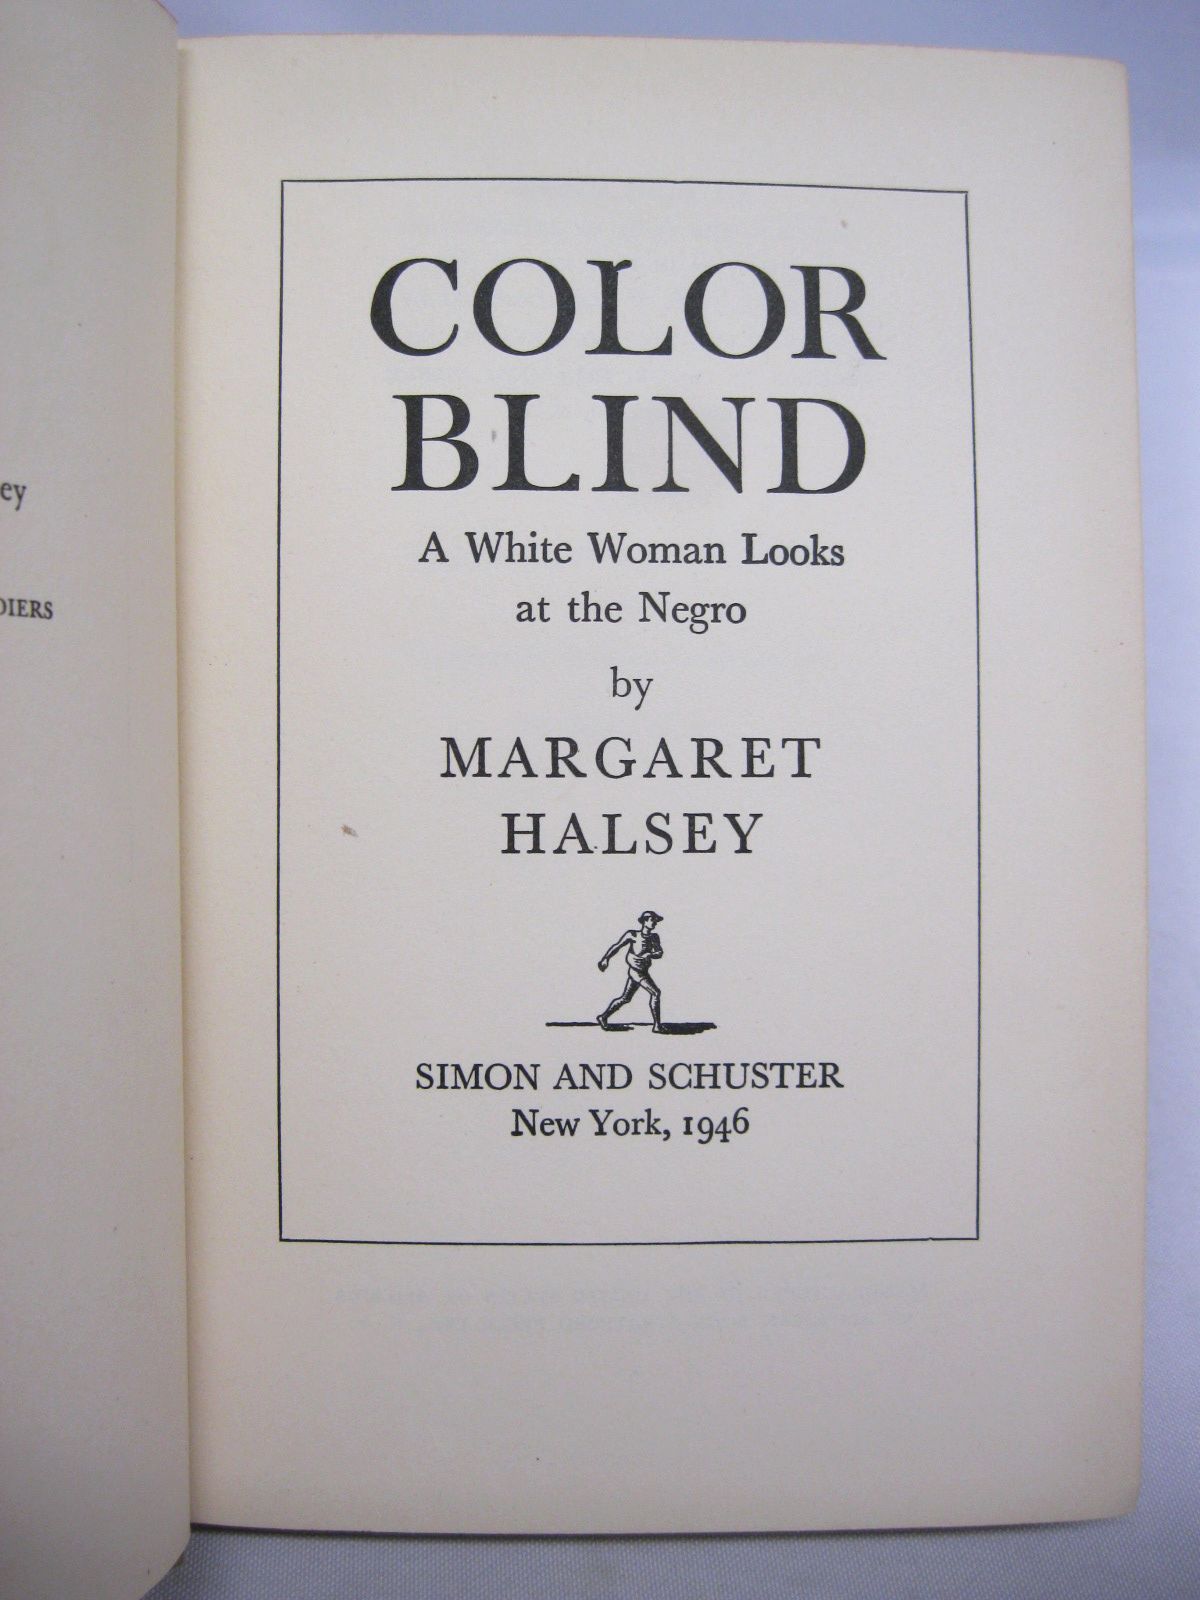 Color Blind: A White Woman Looks at the Negro by Margaret Halsey